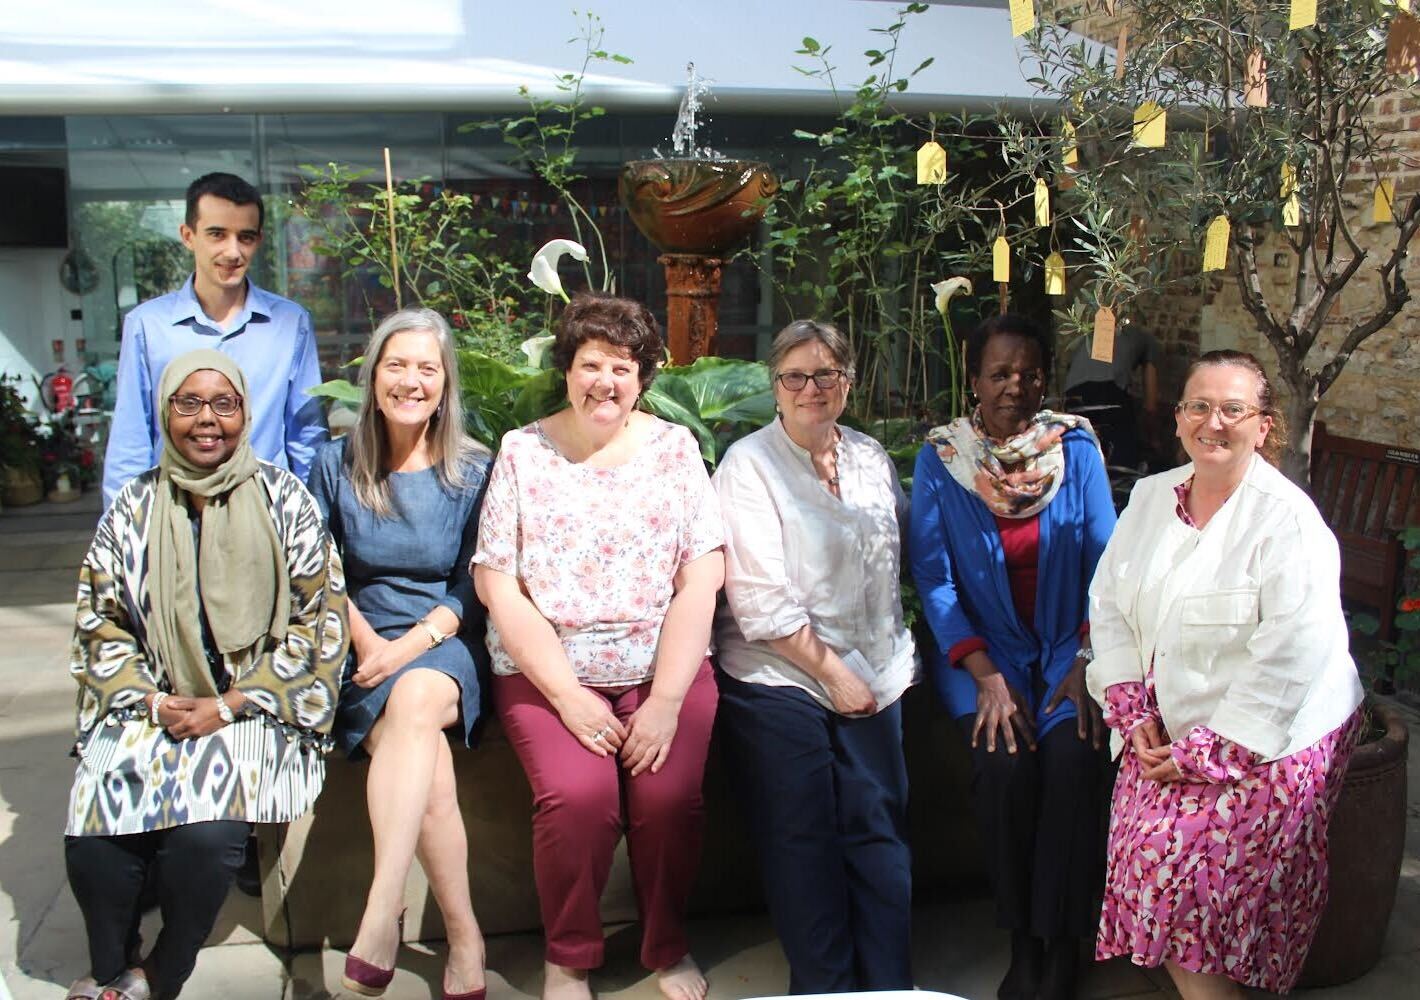 Photographed: The IofC UK team with our friends at St Ethelburga's and attendees on the day